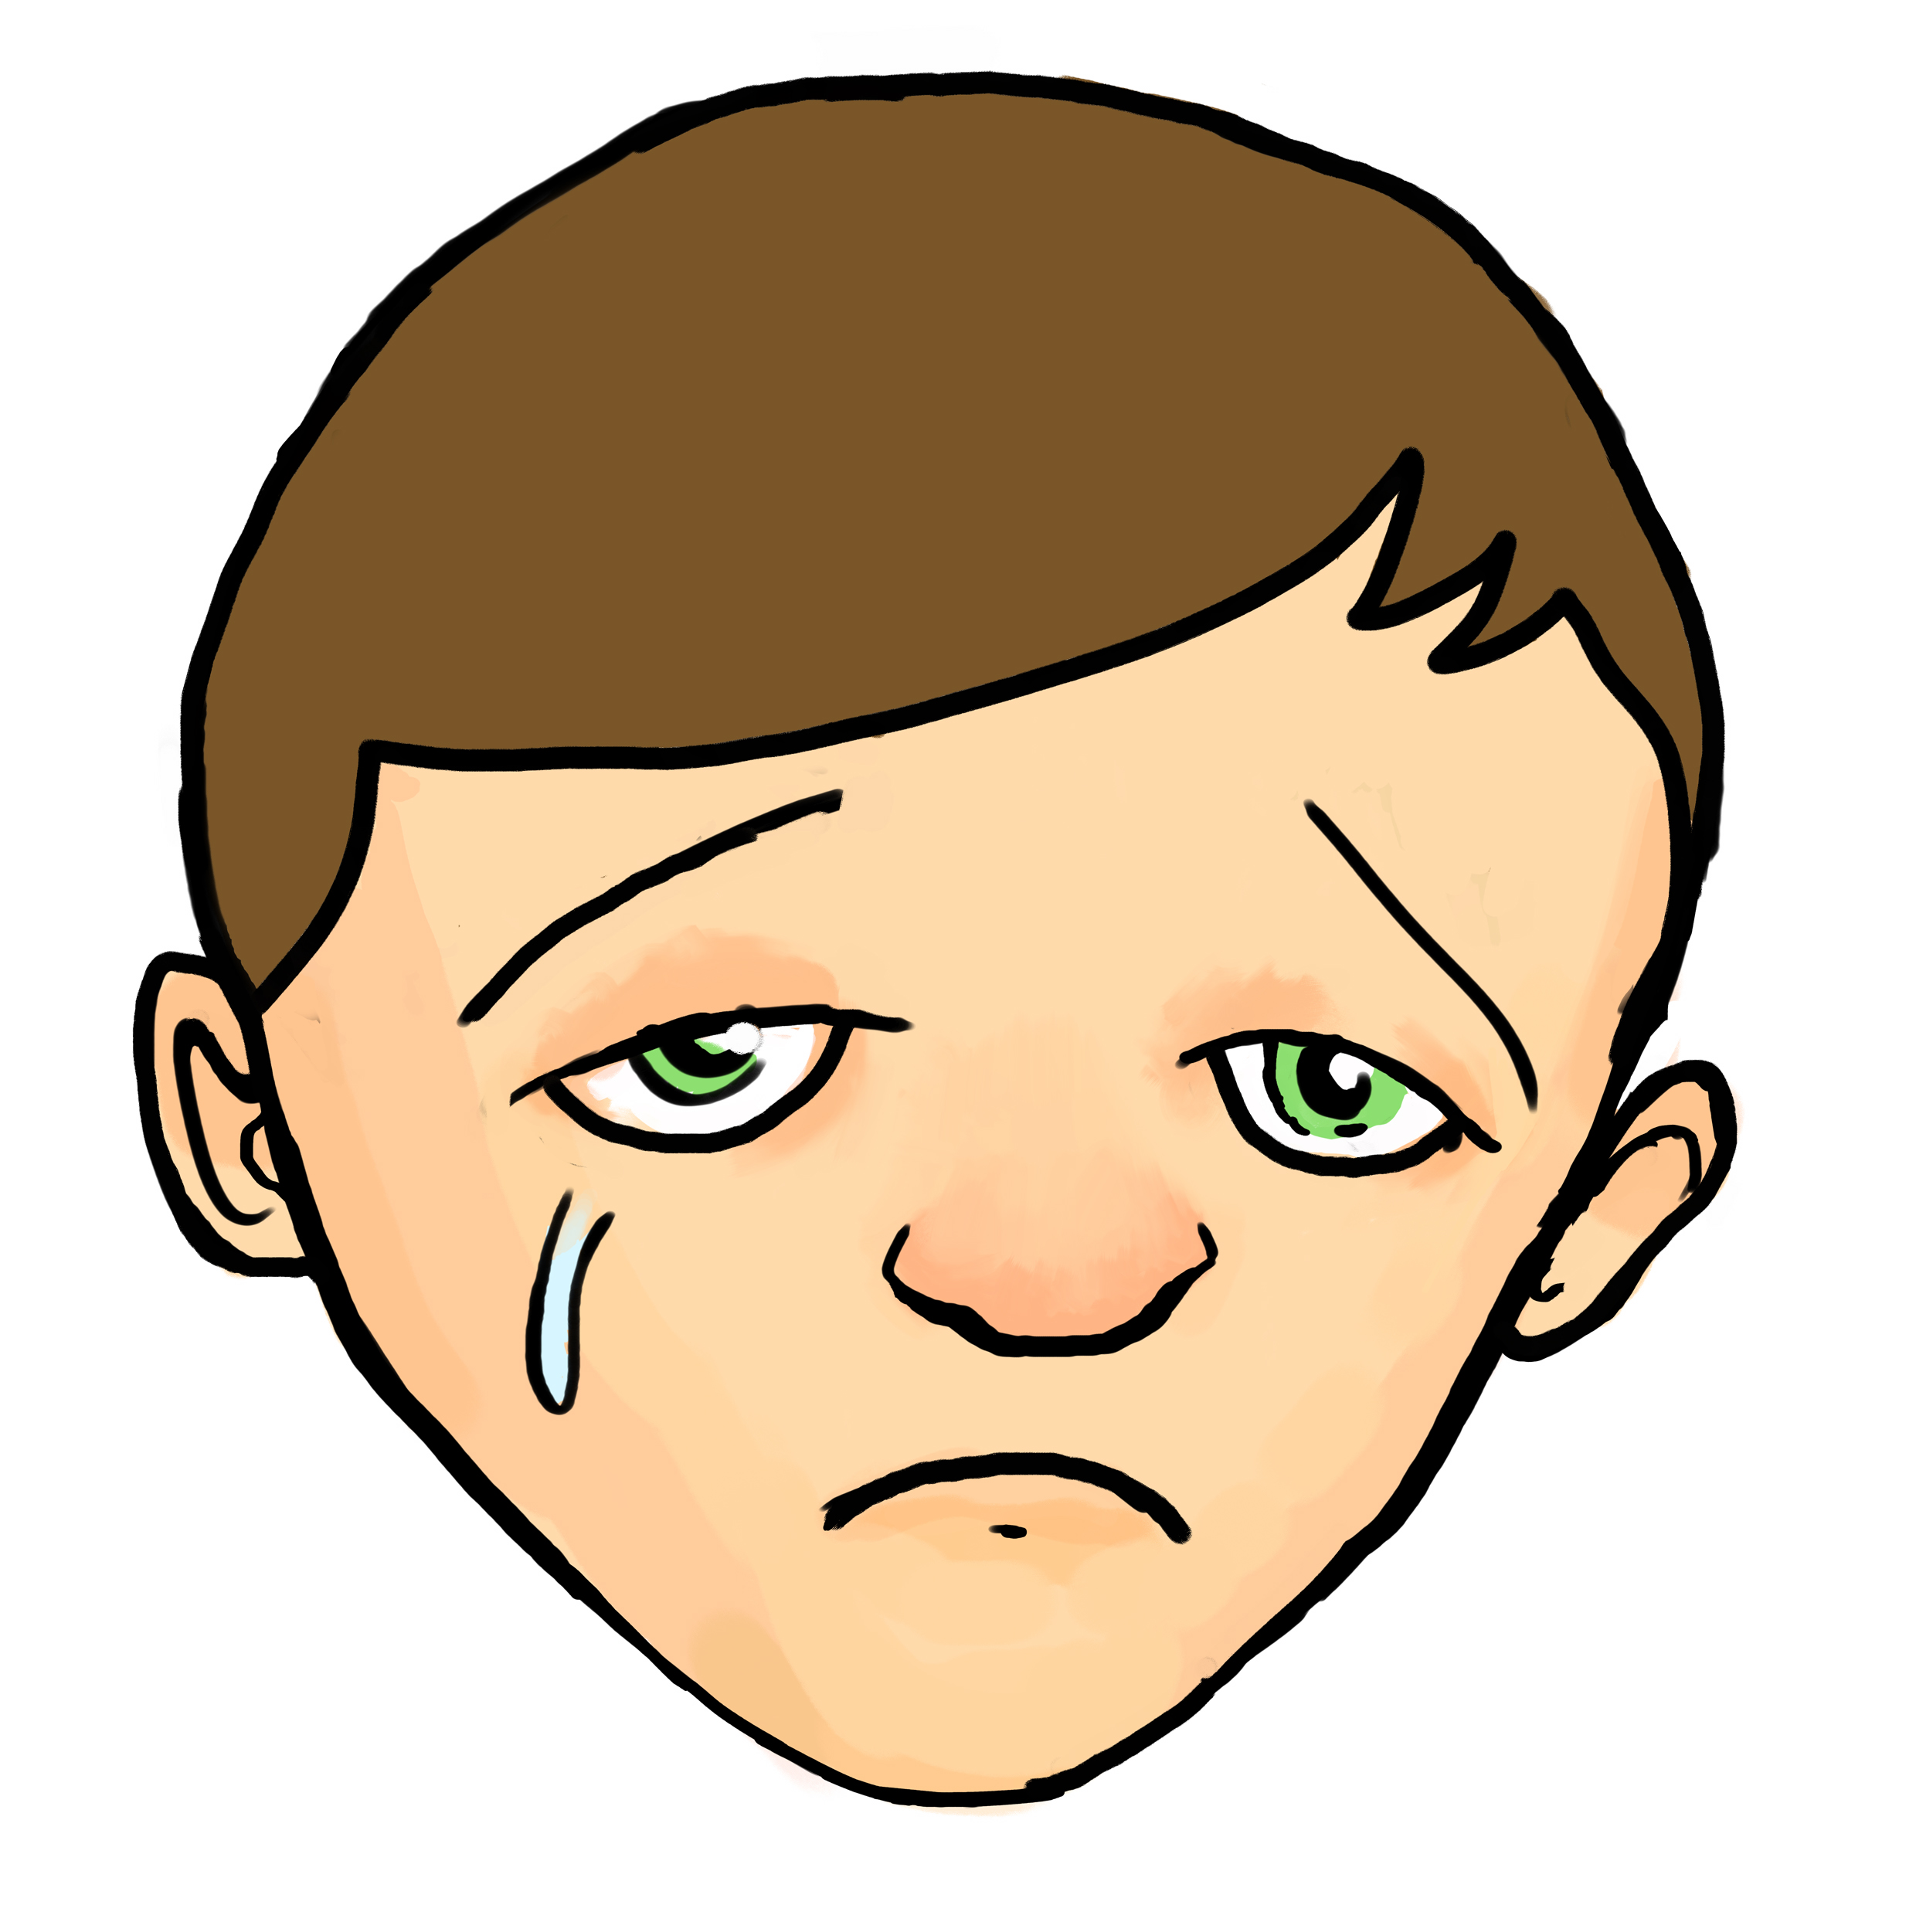 Sad face frowny face clipart cliparts for you clipartcow